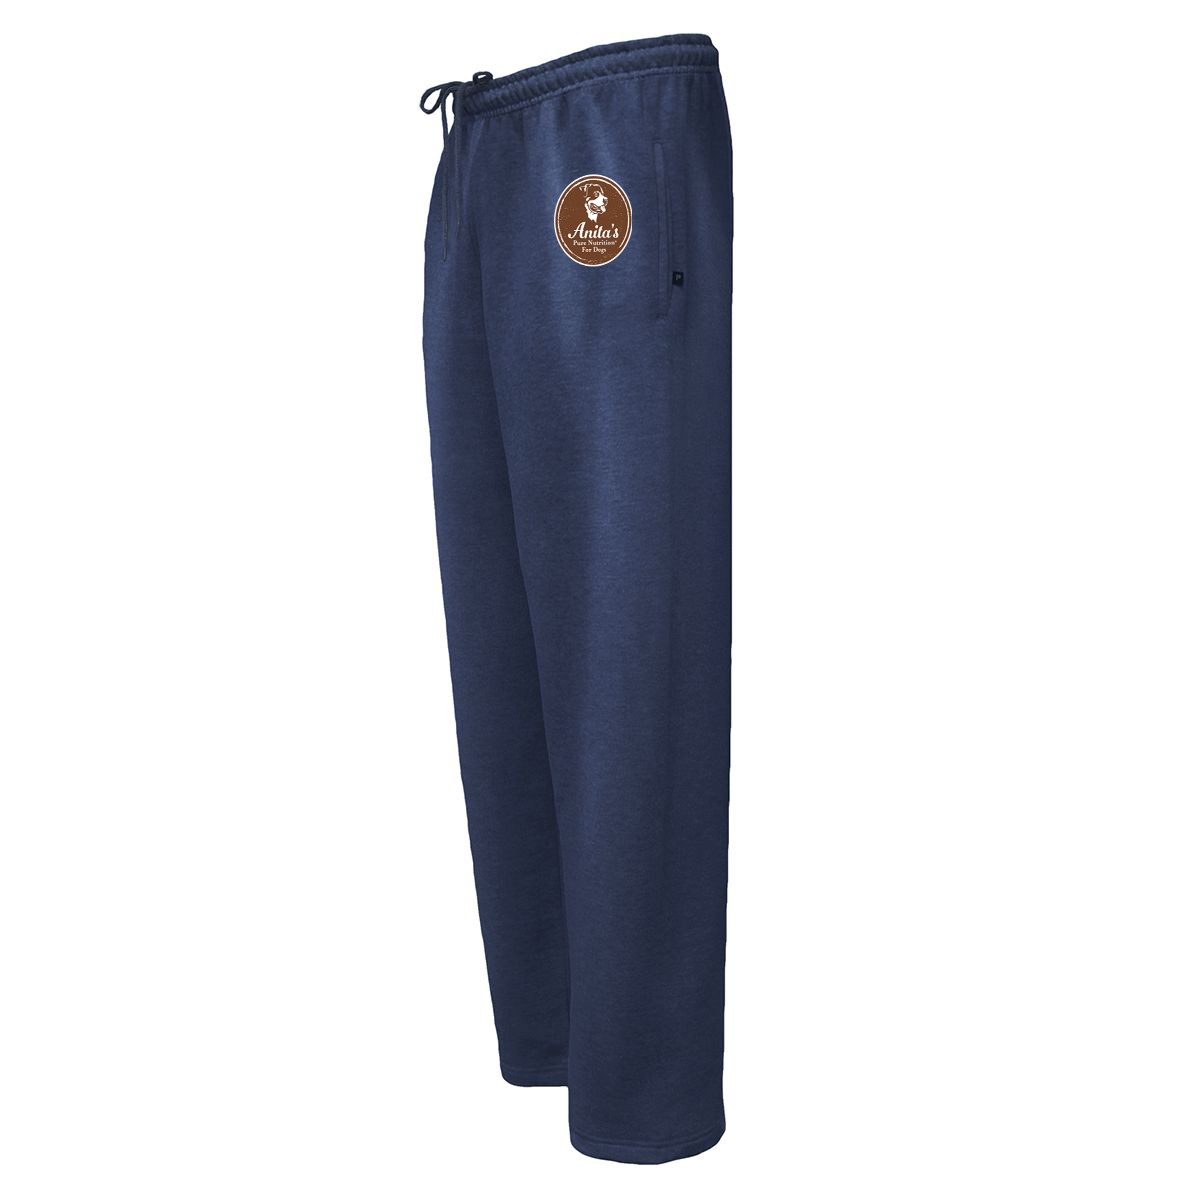 Anita's Pure Nutrition For Dogs Sweatpants